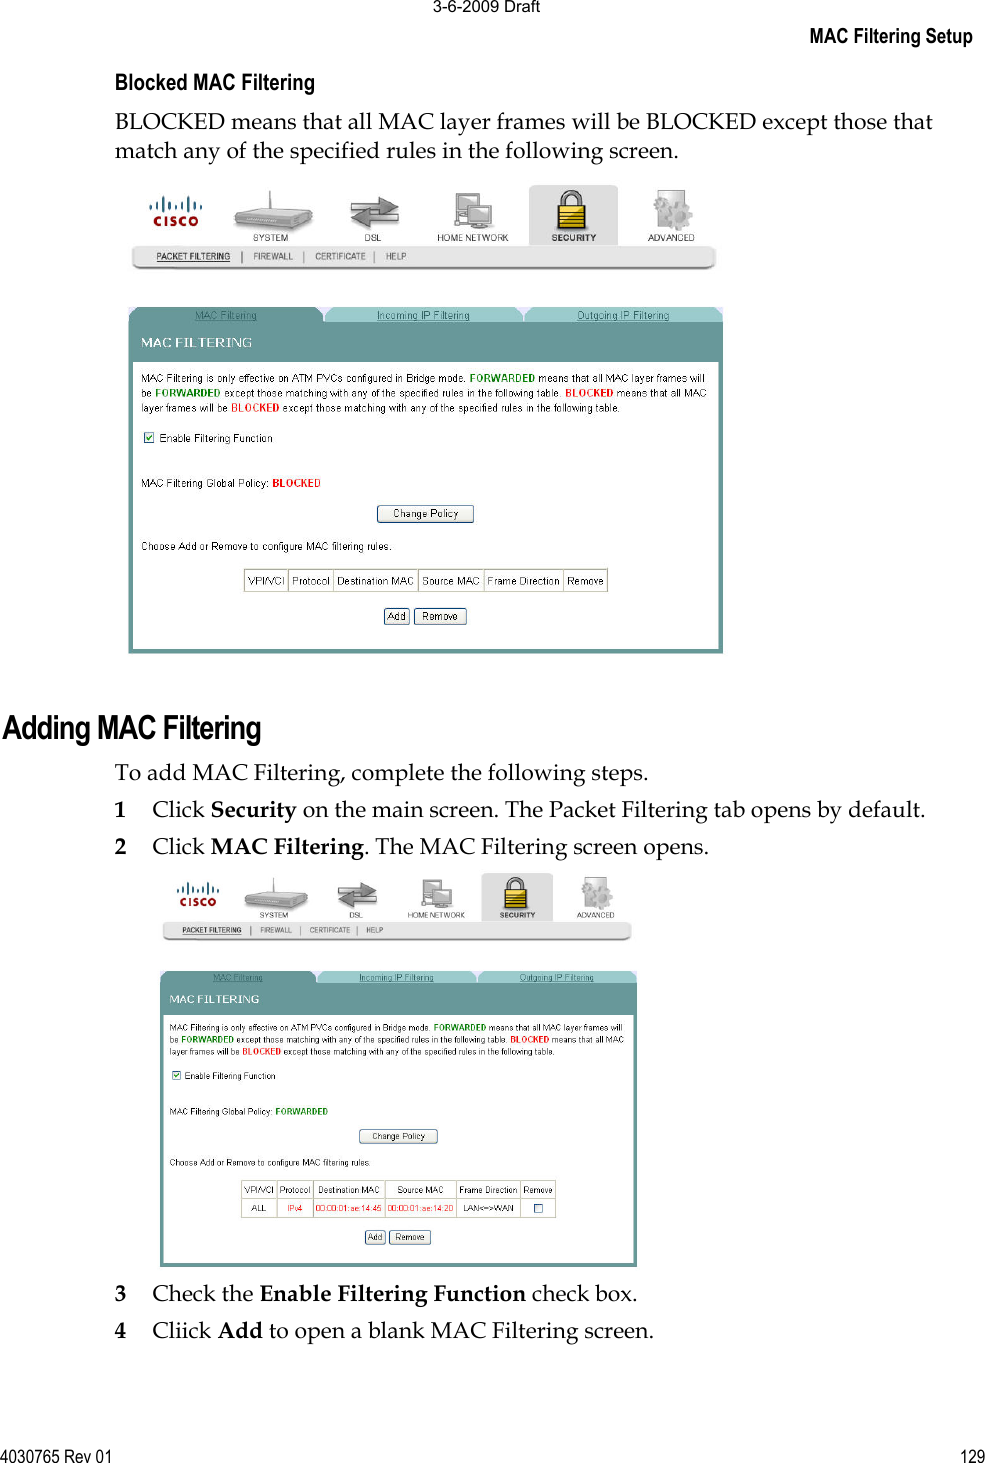 MAC Filtering Setup 4030765 Rev 01 129Blocked MAC Filtering BLOCKED means that all MAC layer frames will be BLOCKED except those that match any of the specified rules in the following screen. Adding MAC Filtering To add MAC Filtering, complete the following steps. 1Click Security on the main screen. The Packet Filtering tab opens by default. 2Click MAC Filtering. The MAC Filtering screen opens. 3Check the Enable Filtering Function check box. 4Cliick Add to open a blank MAC Filtering screen.  3-6-2009 Draft